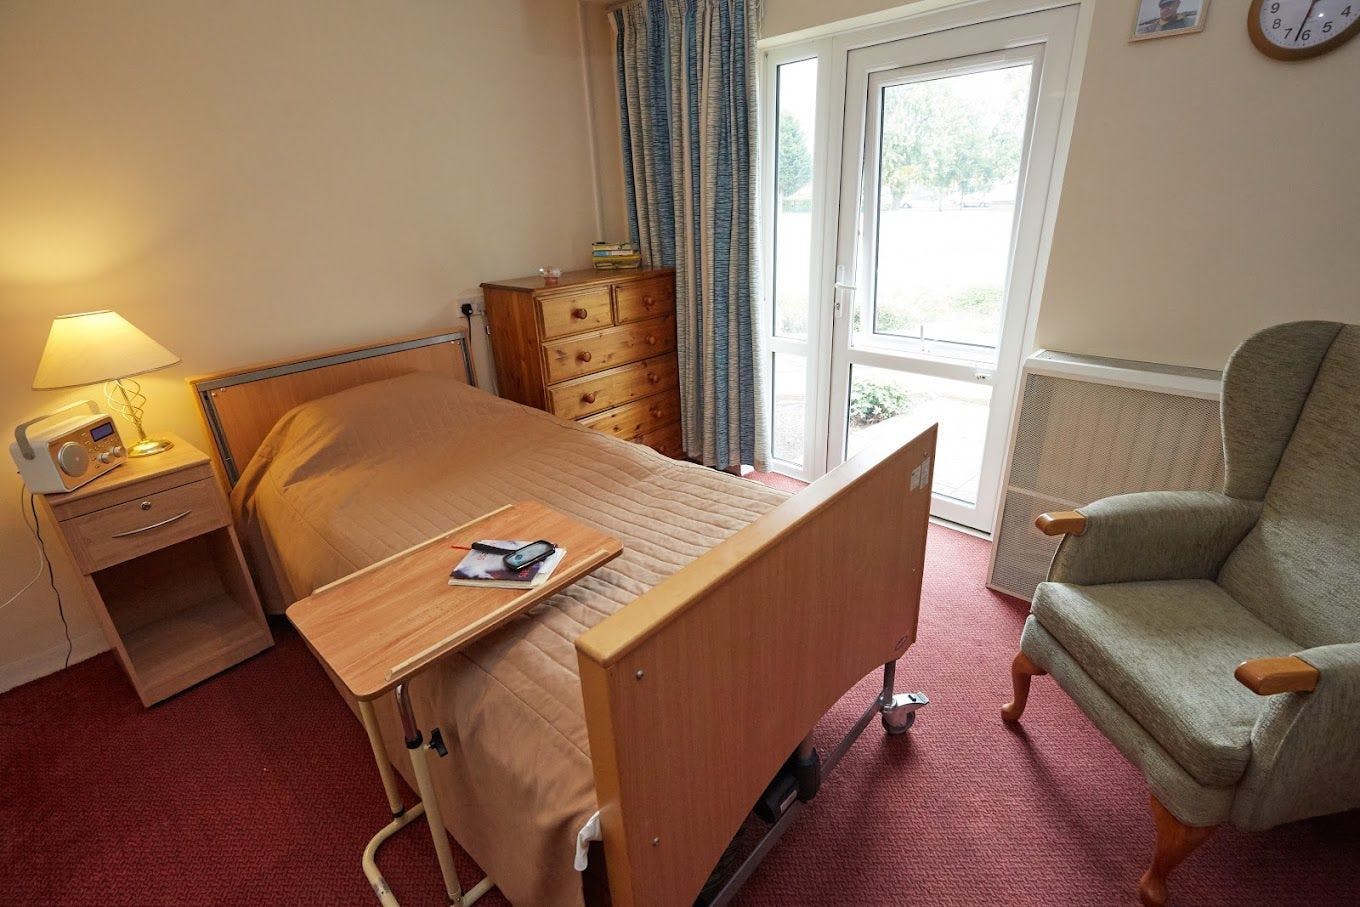 Bedroom at Beckside Care Home in North Hykeham, Lincolnshire